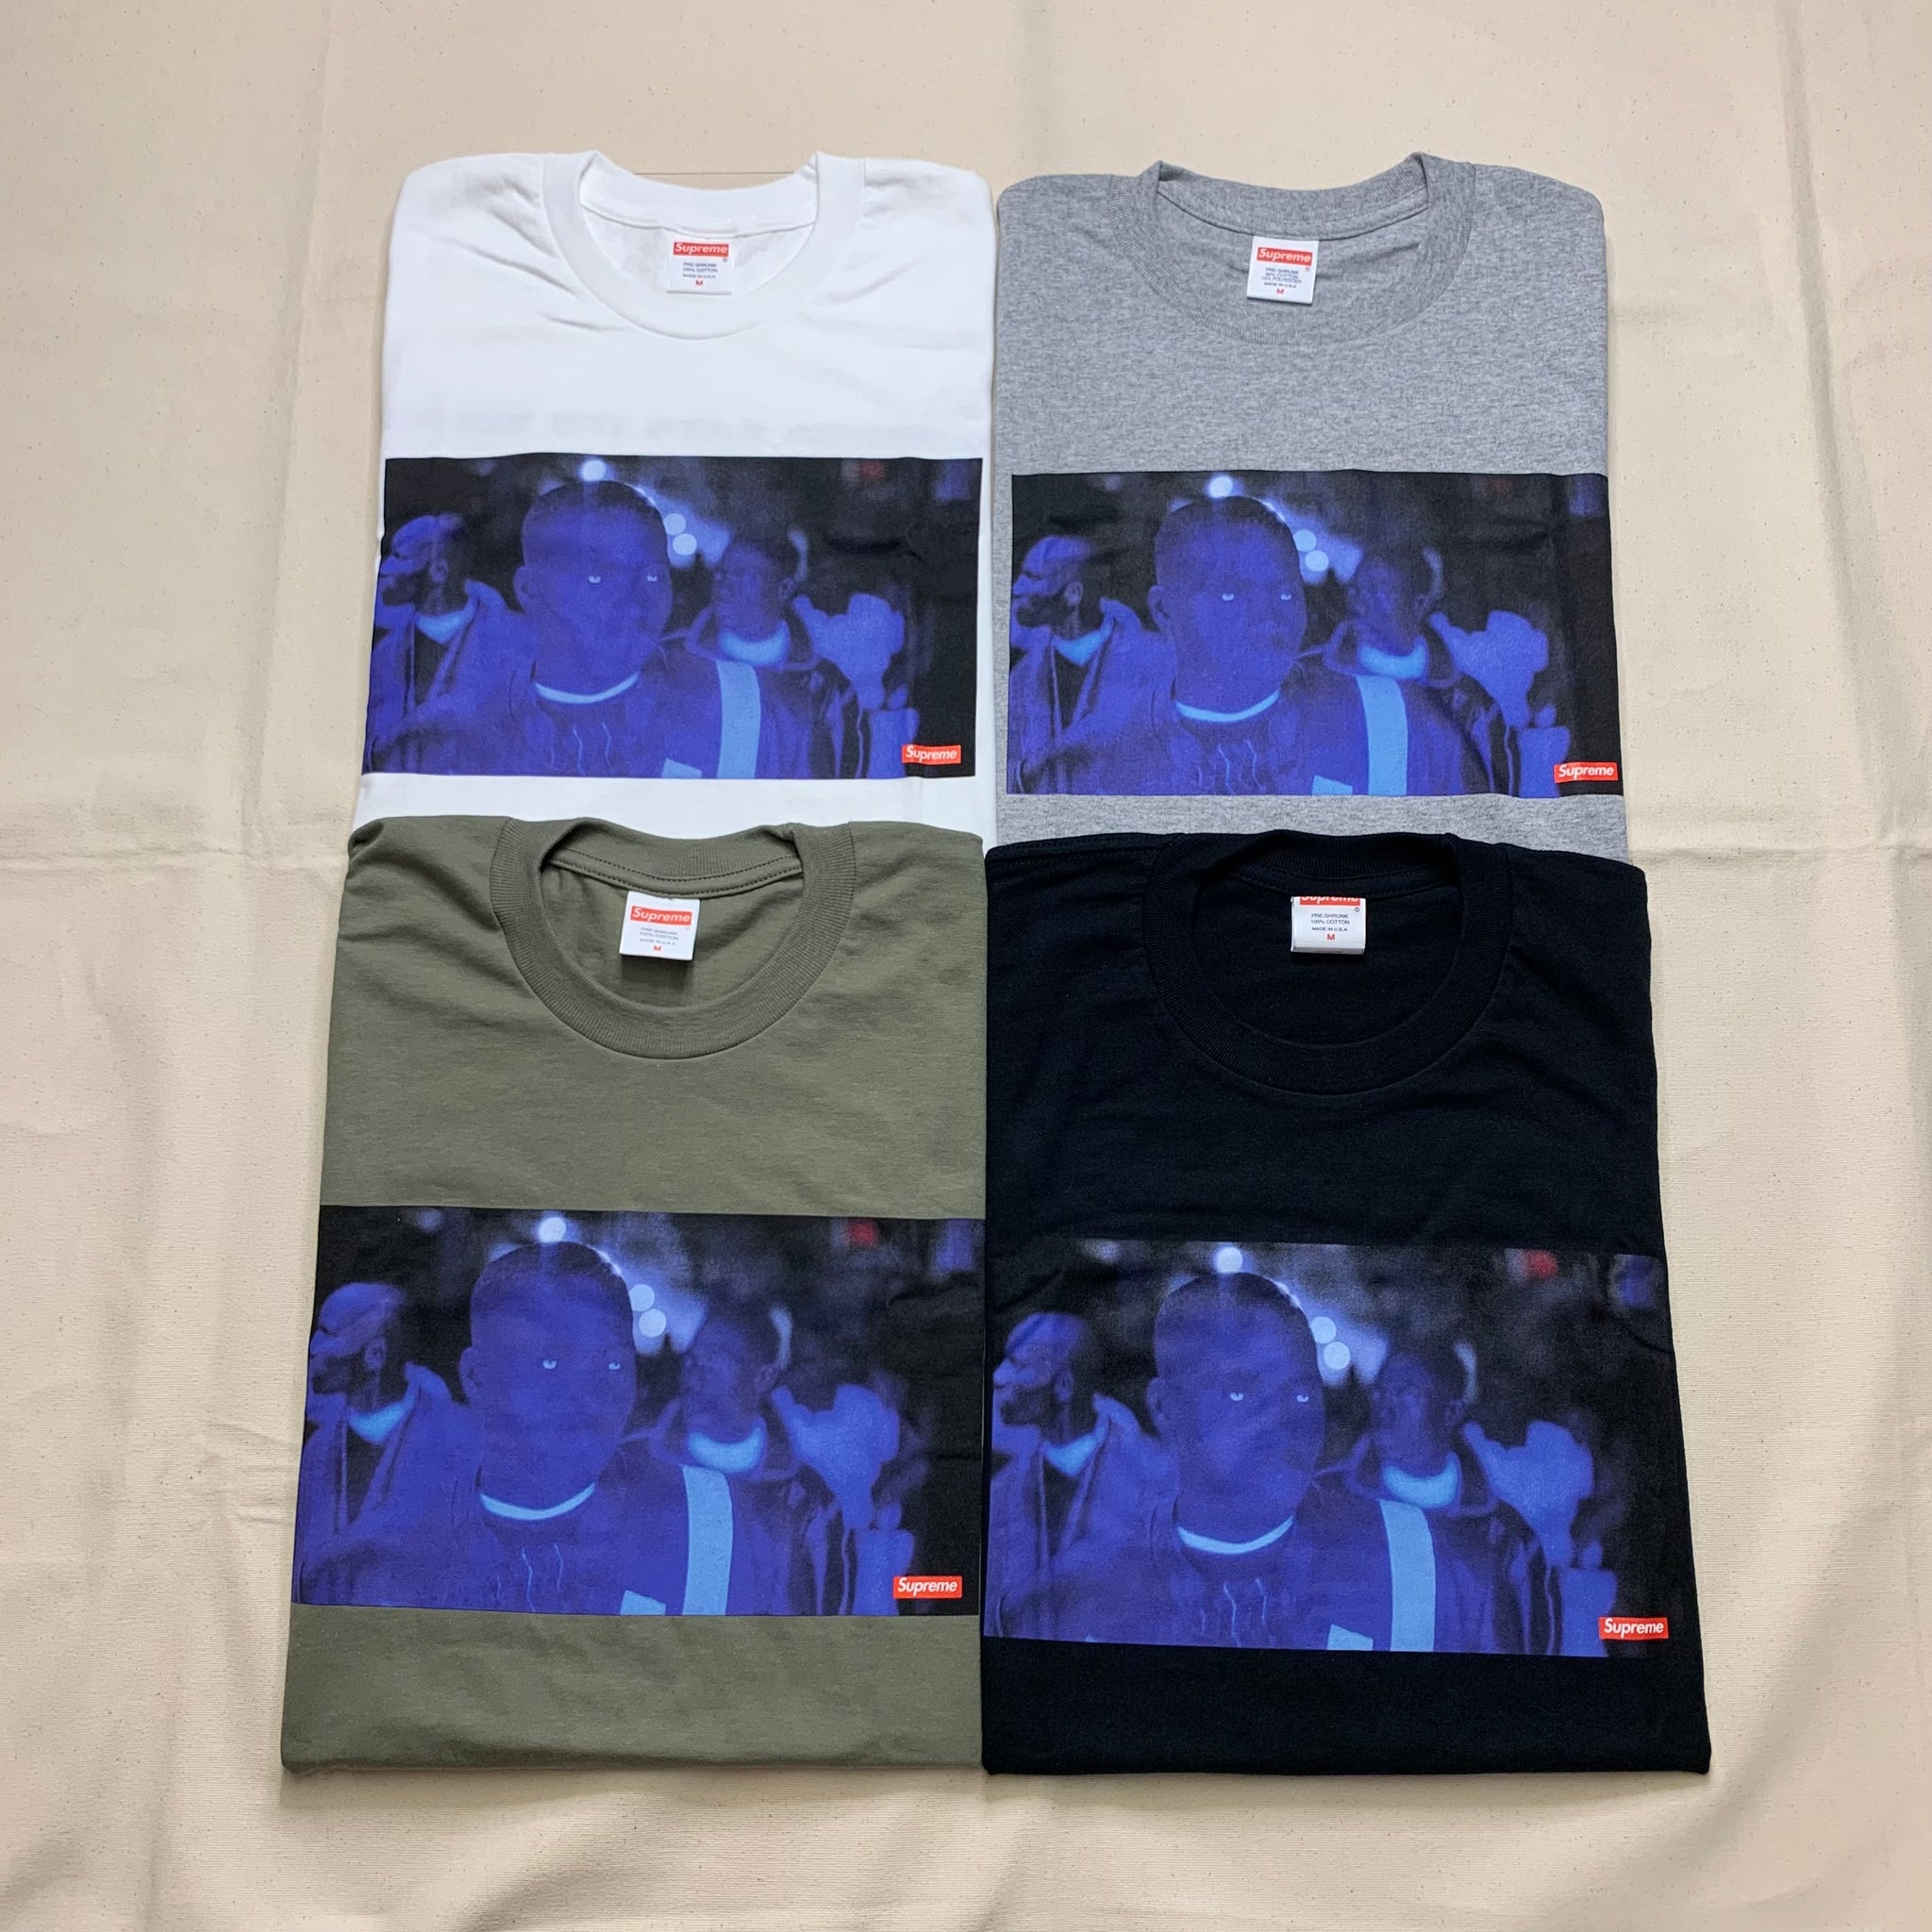 SUPREME AMERICA EATS ITS YOUNG TEE – Trade Point_HK